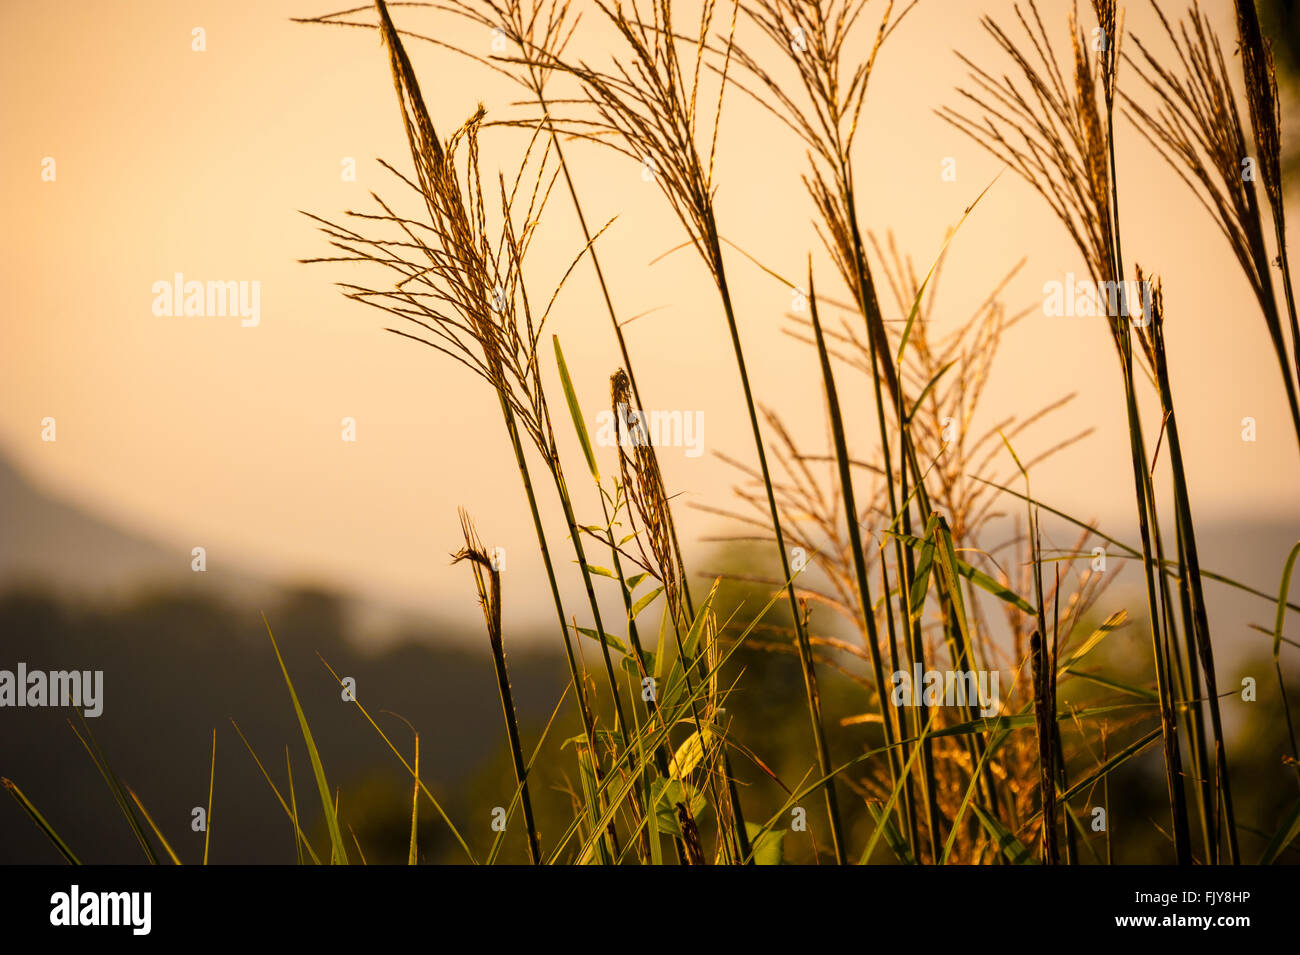 Tall stalks of grass illuminated by the rising sun in the mountains of Asheville, North Carolina. Stock Photo